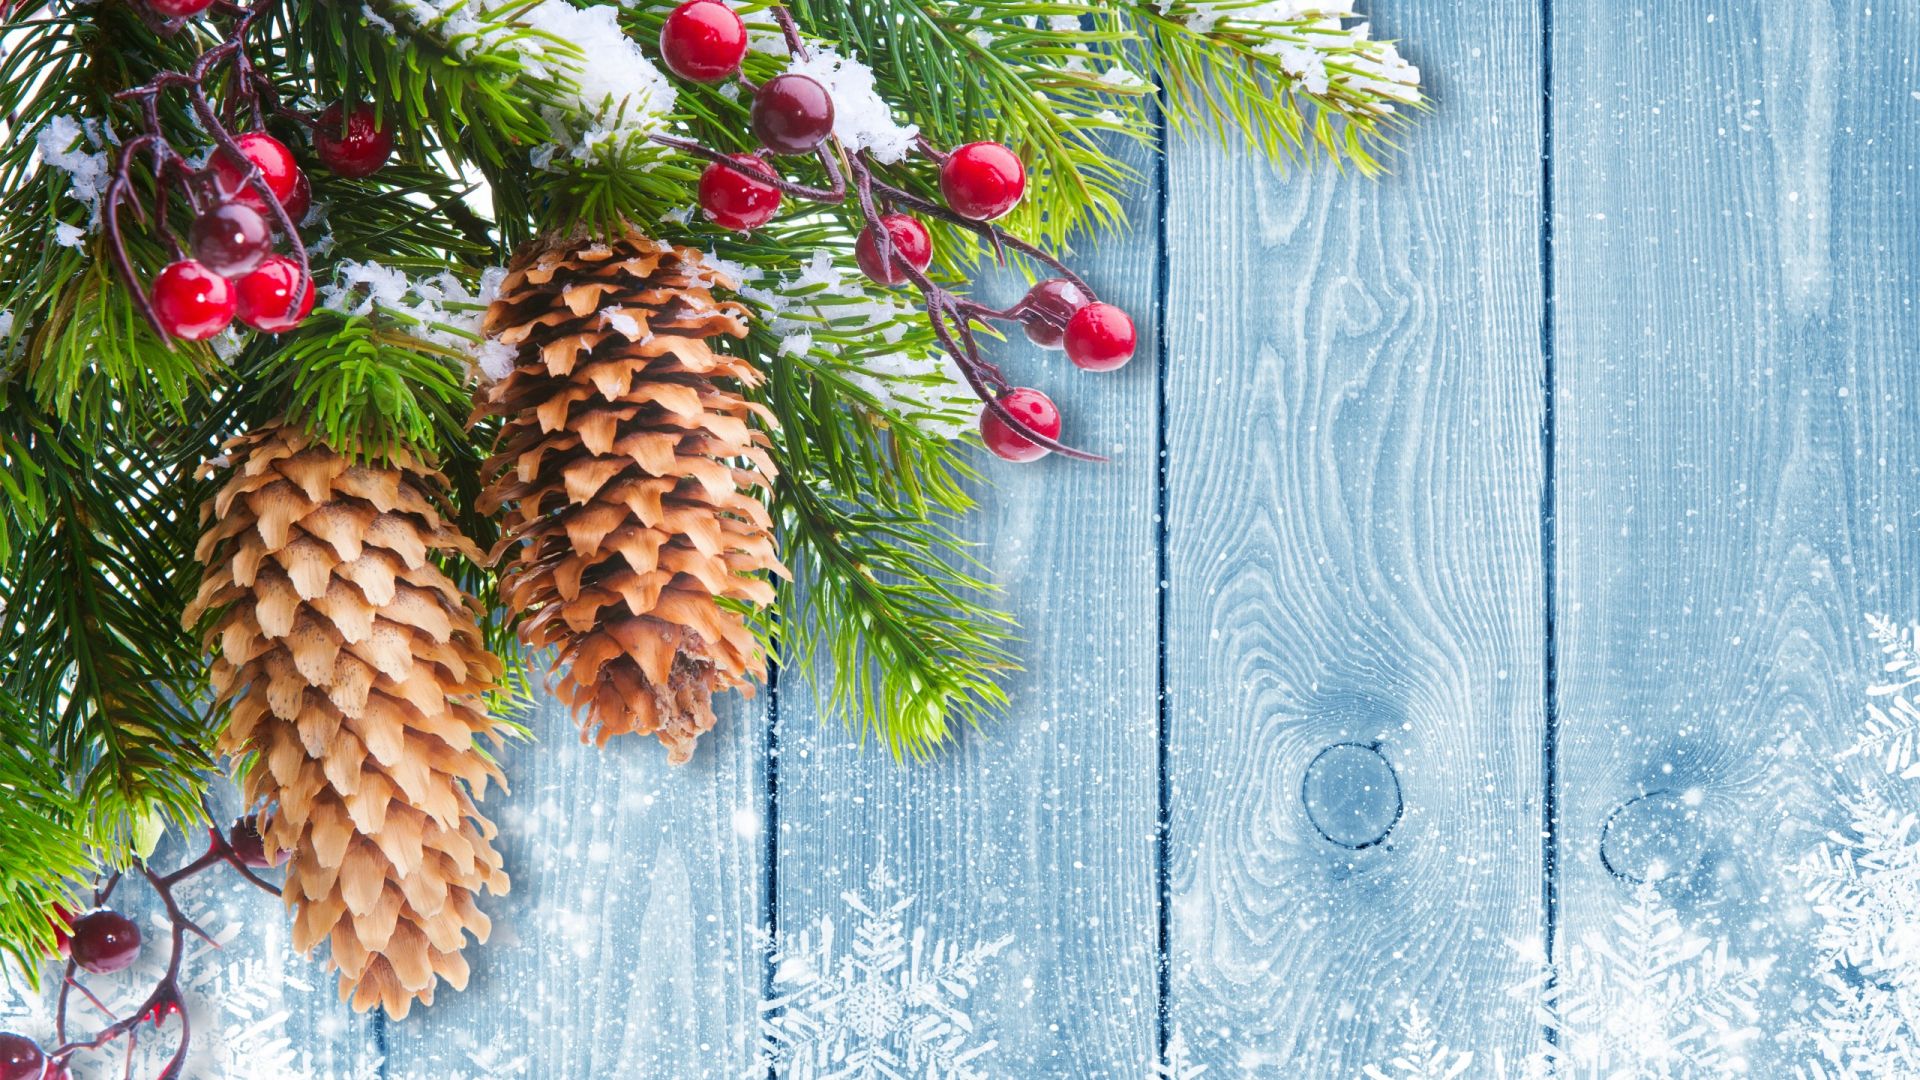 Desktop Wallpaper Christmas Decorations, Xmas Tree, Holiday, HD Image, Picture, Background, Ia2s7n